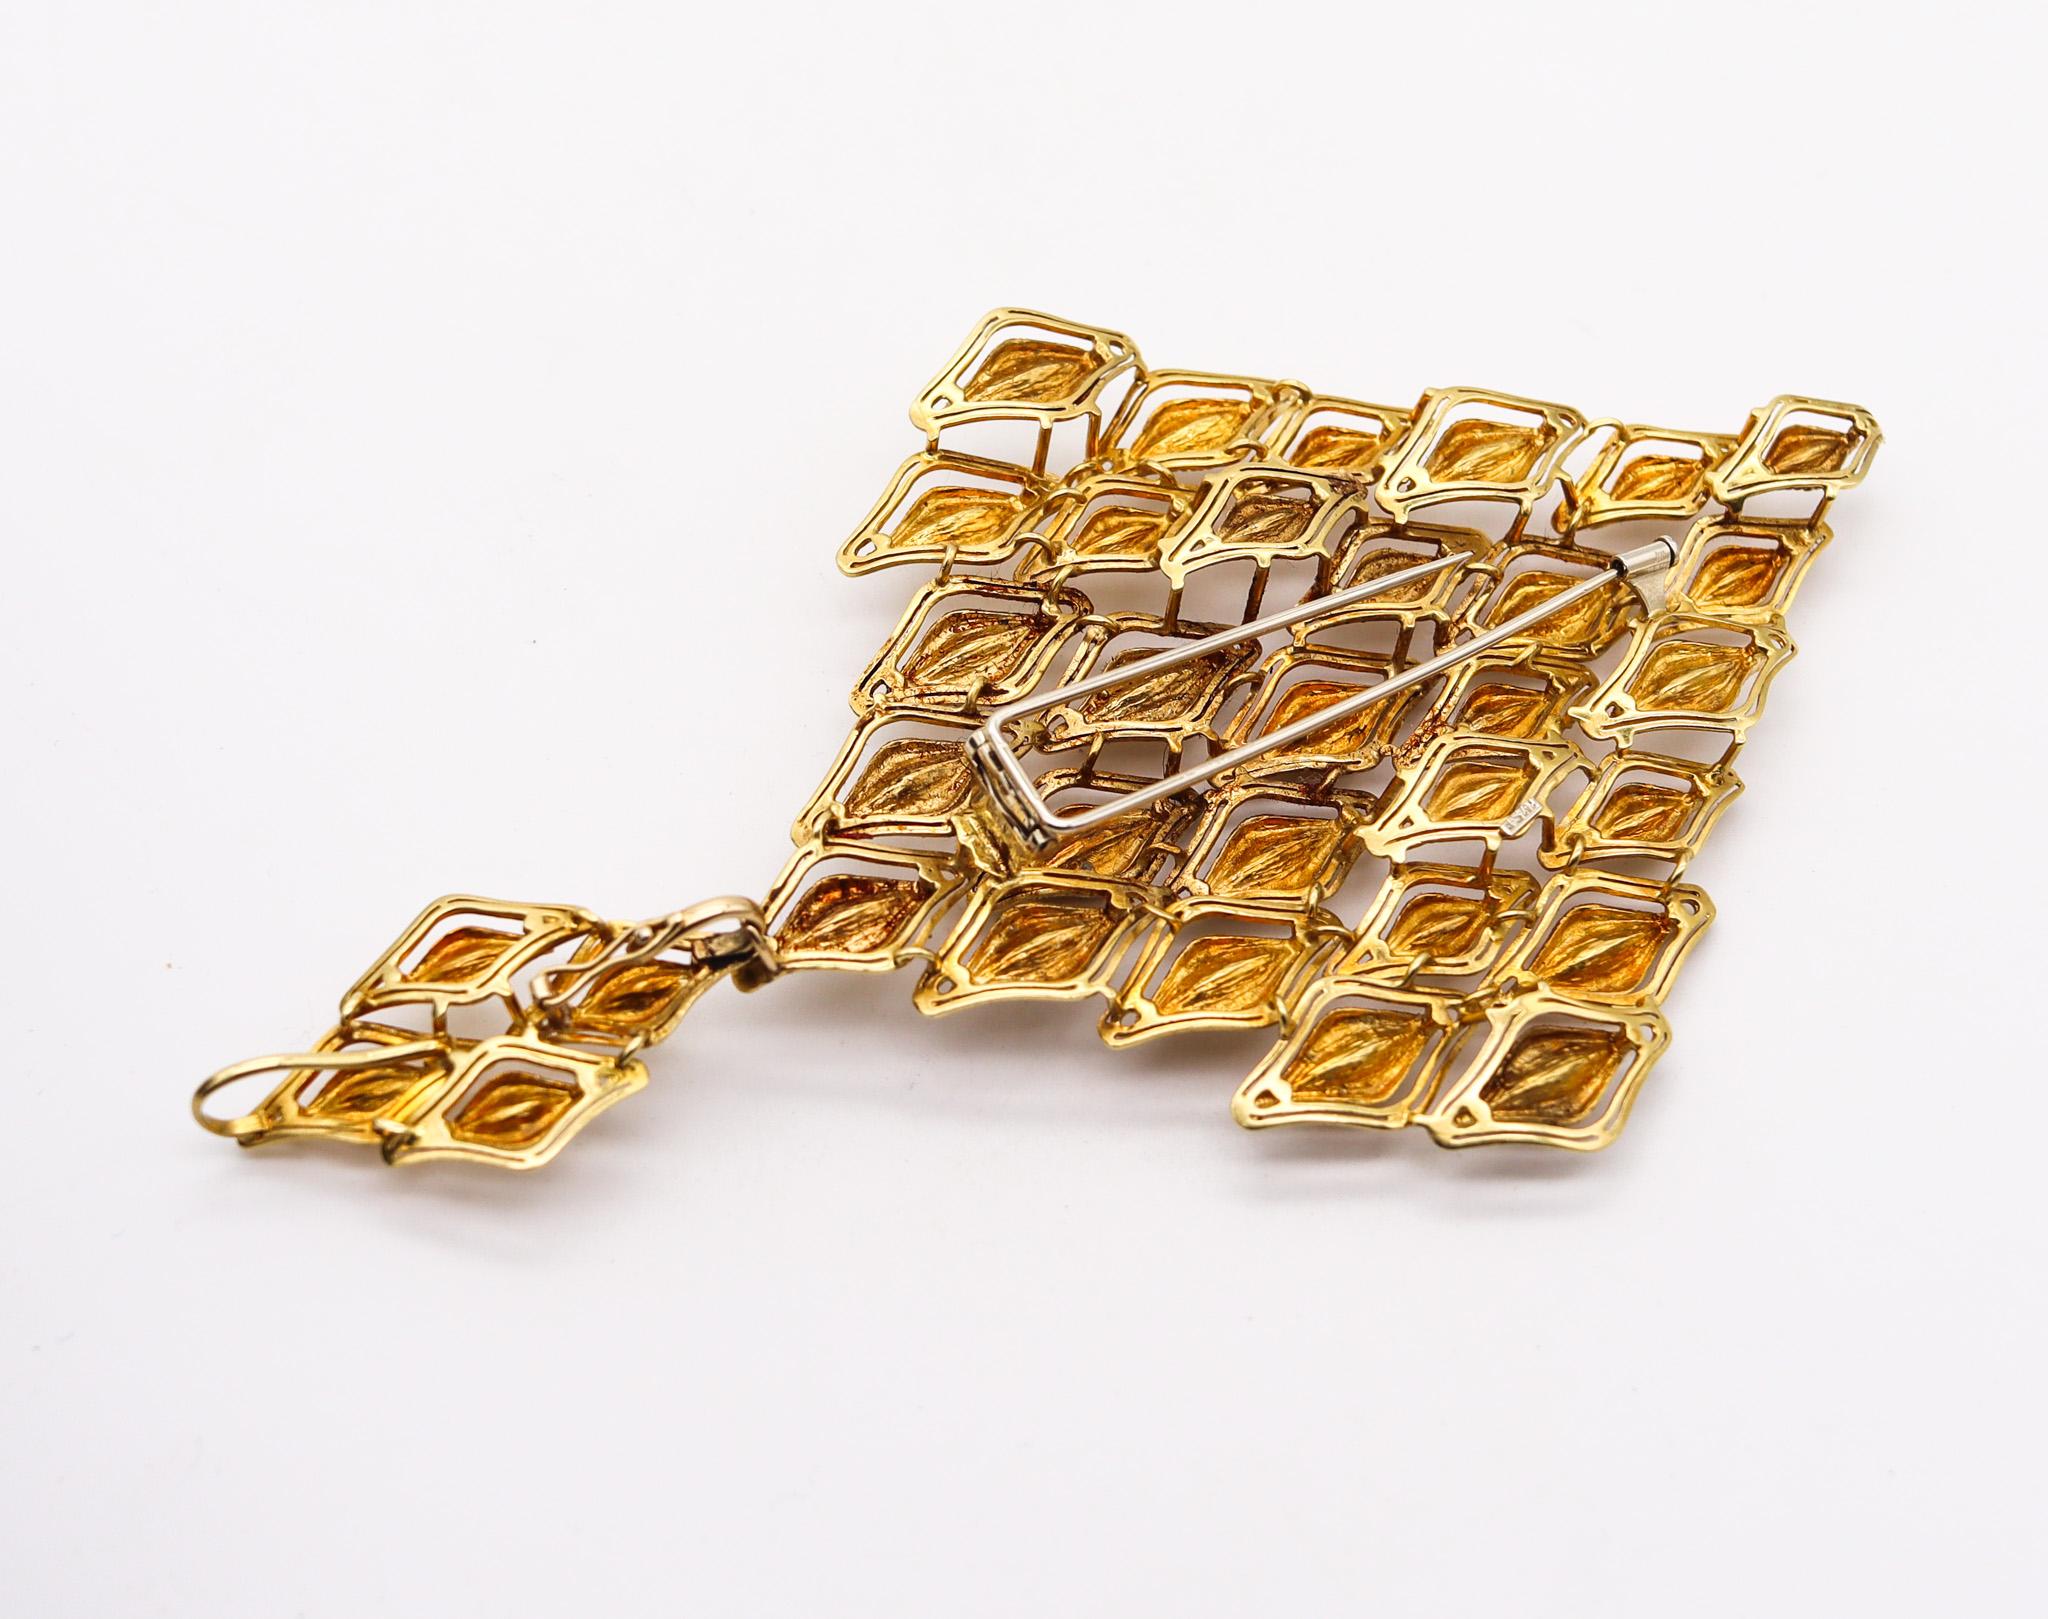 Spritzer & Furhmann 1960 Retro Modernist Large Pendant In Solid 18Kt Yellow Gold For Sale 1